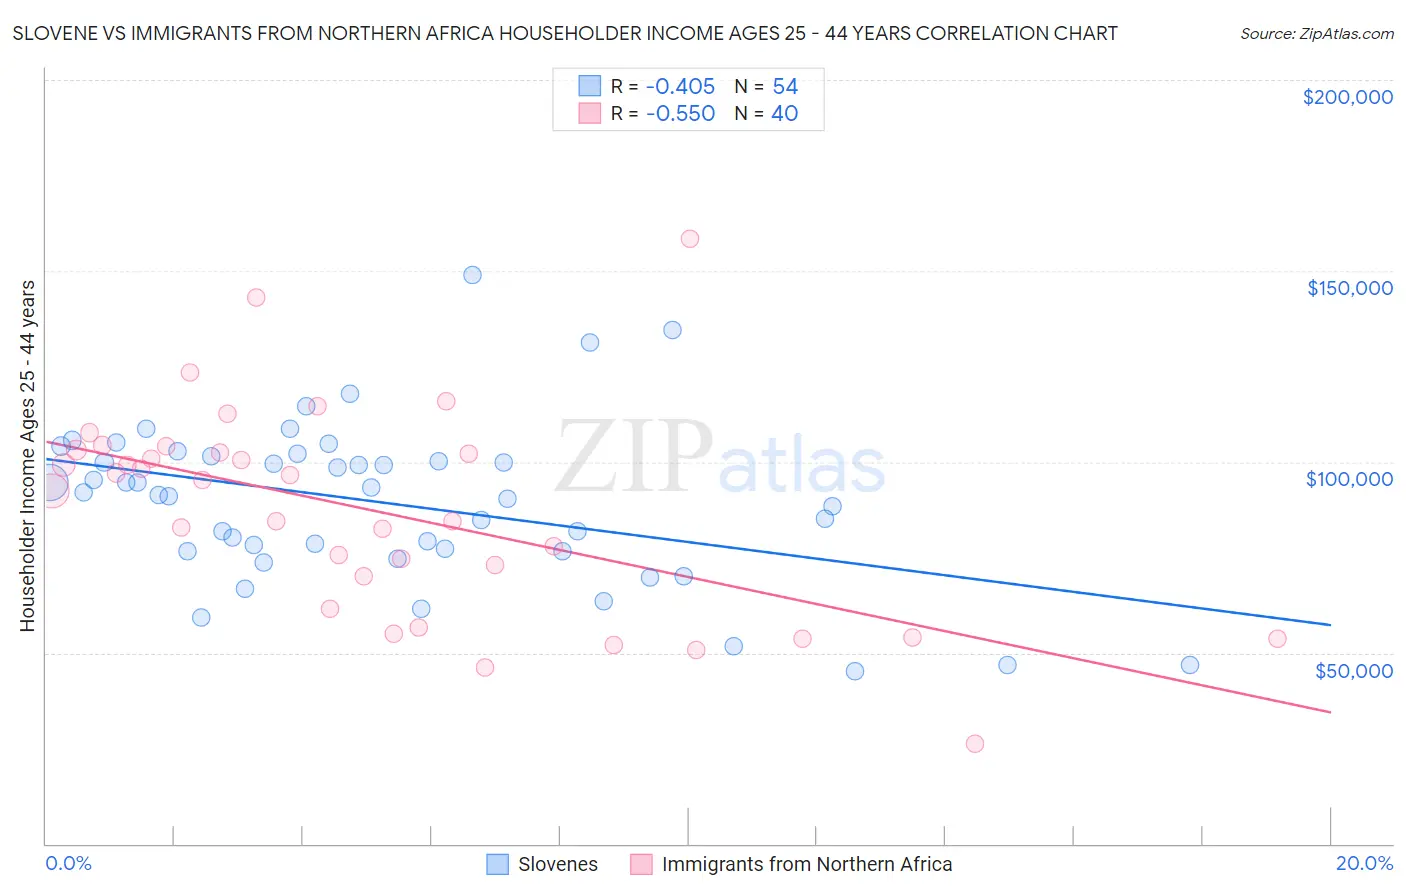 Slovene vs Immigrants from Northern Africa Householder Income Ages 25 - 44 years